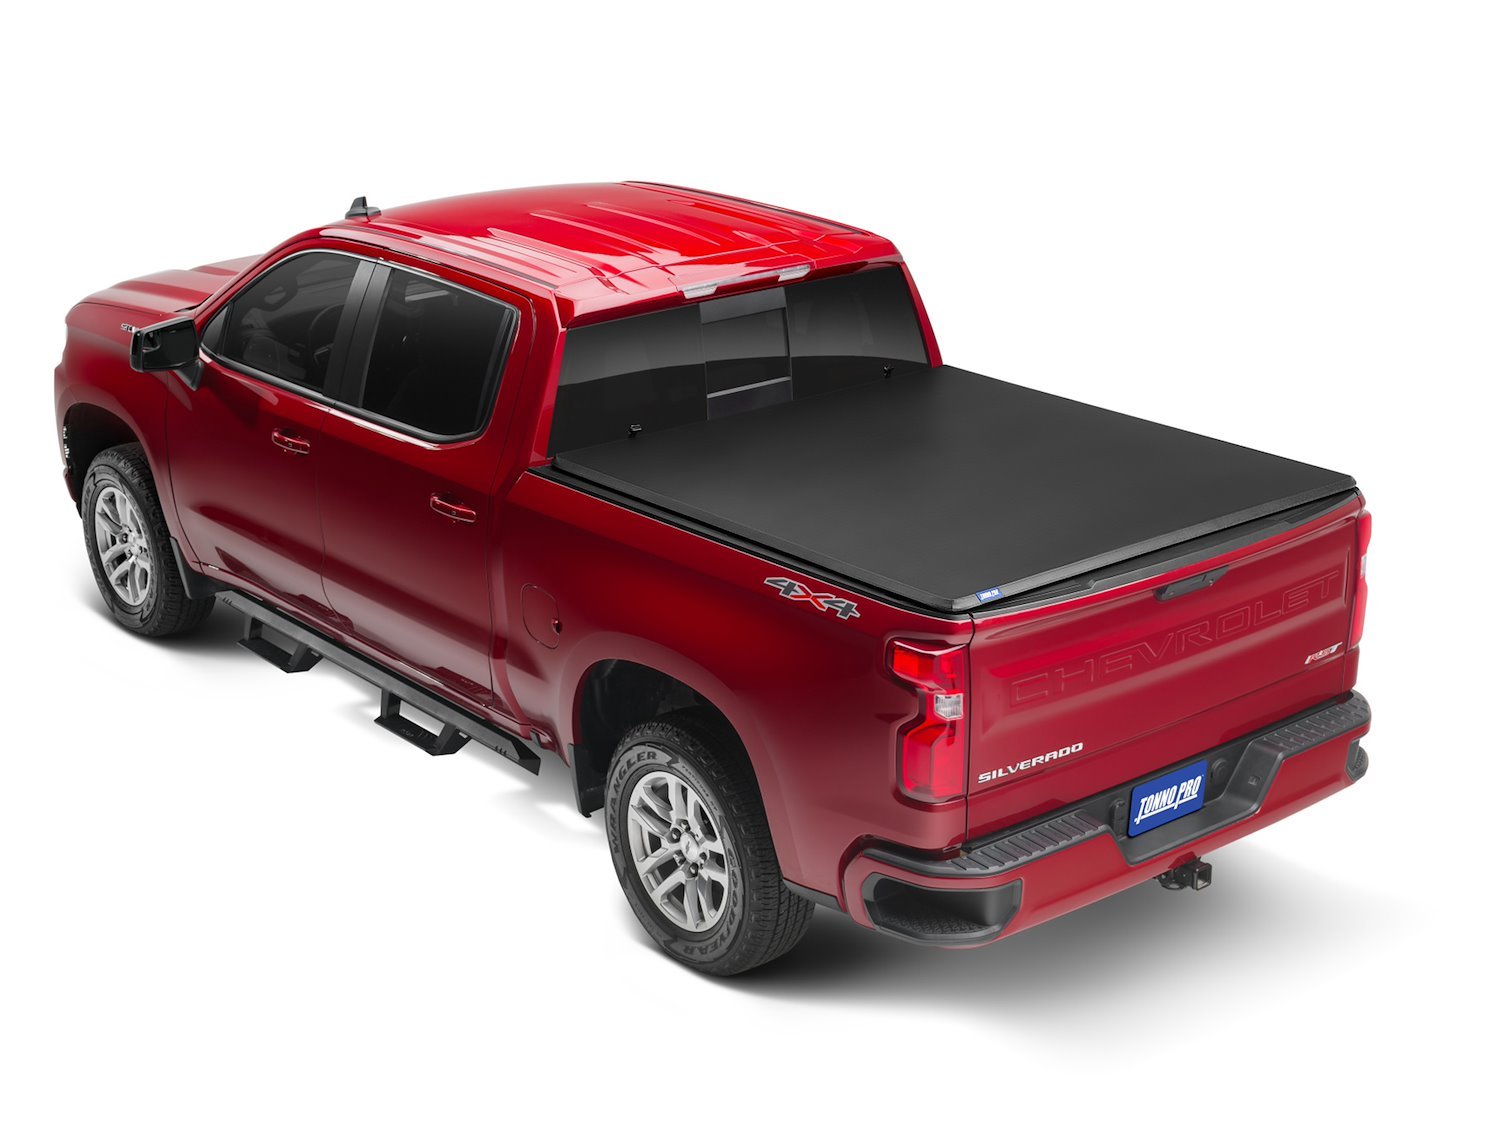 Soft Vinyl Tri-Fold Tonneau Cover Fits Select GM Silverado/Sierra 2500 HD, 3500 HD Trucks [6 ft. 10 in. Bed without Side Boxes]